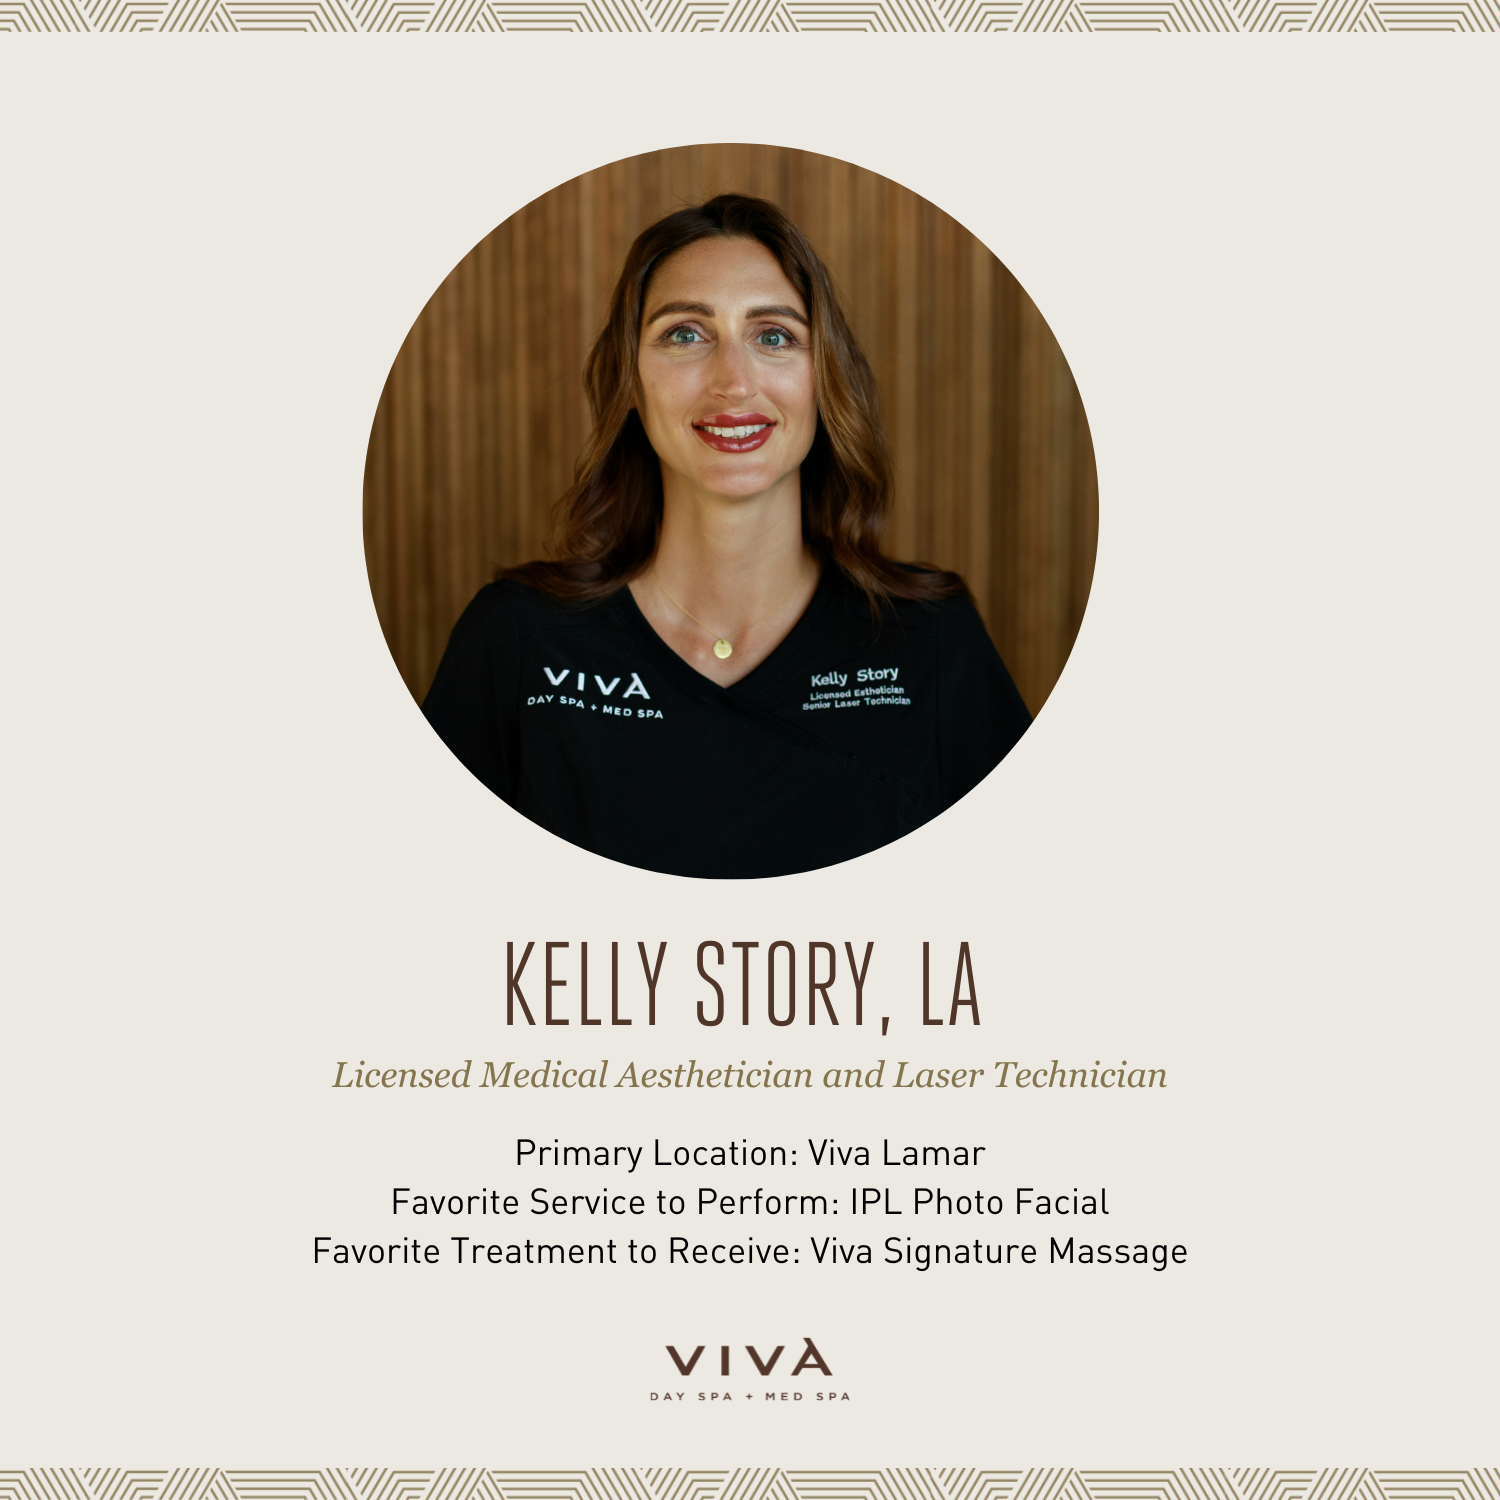 National Esthetician Day with Kelly Story | Viva Day Spa + Med Spa in Austin, Texas